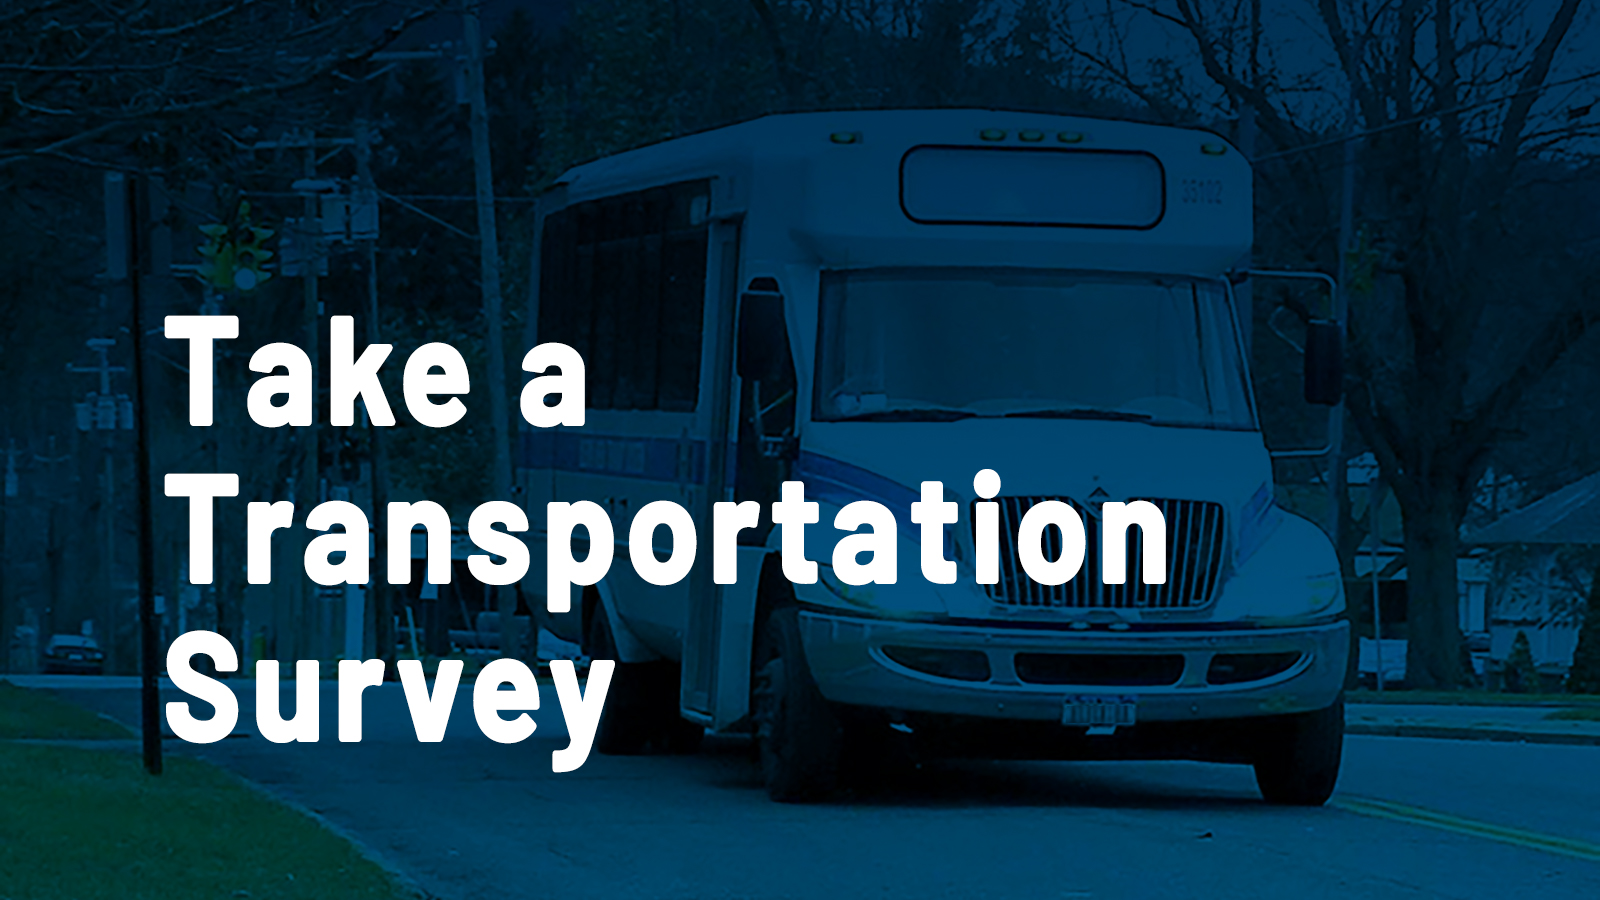 Text "Take a Transportation Survey" overlayed on image of bus